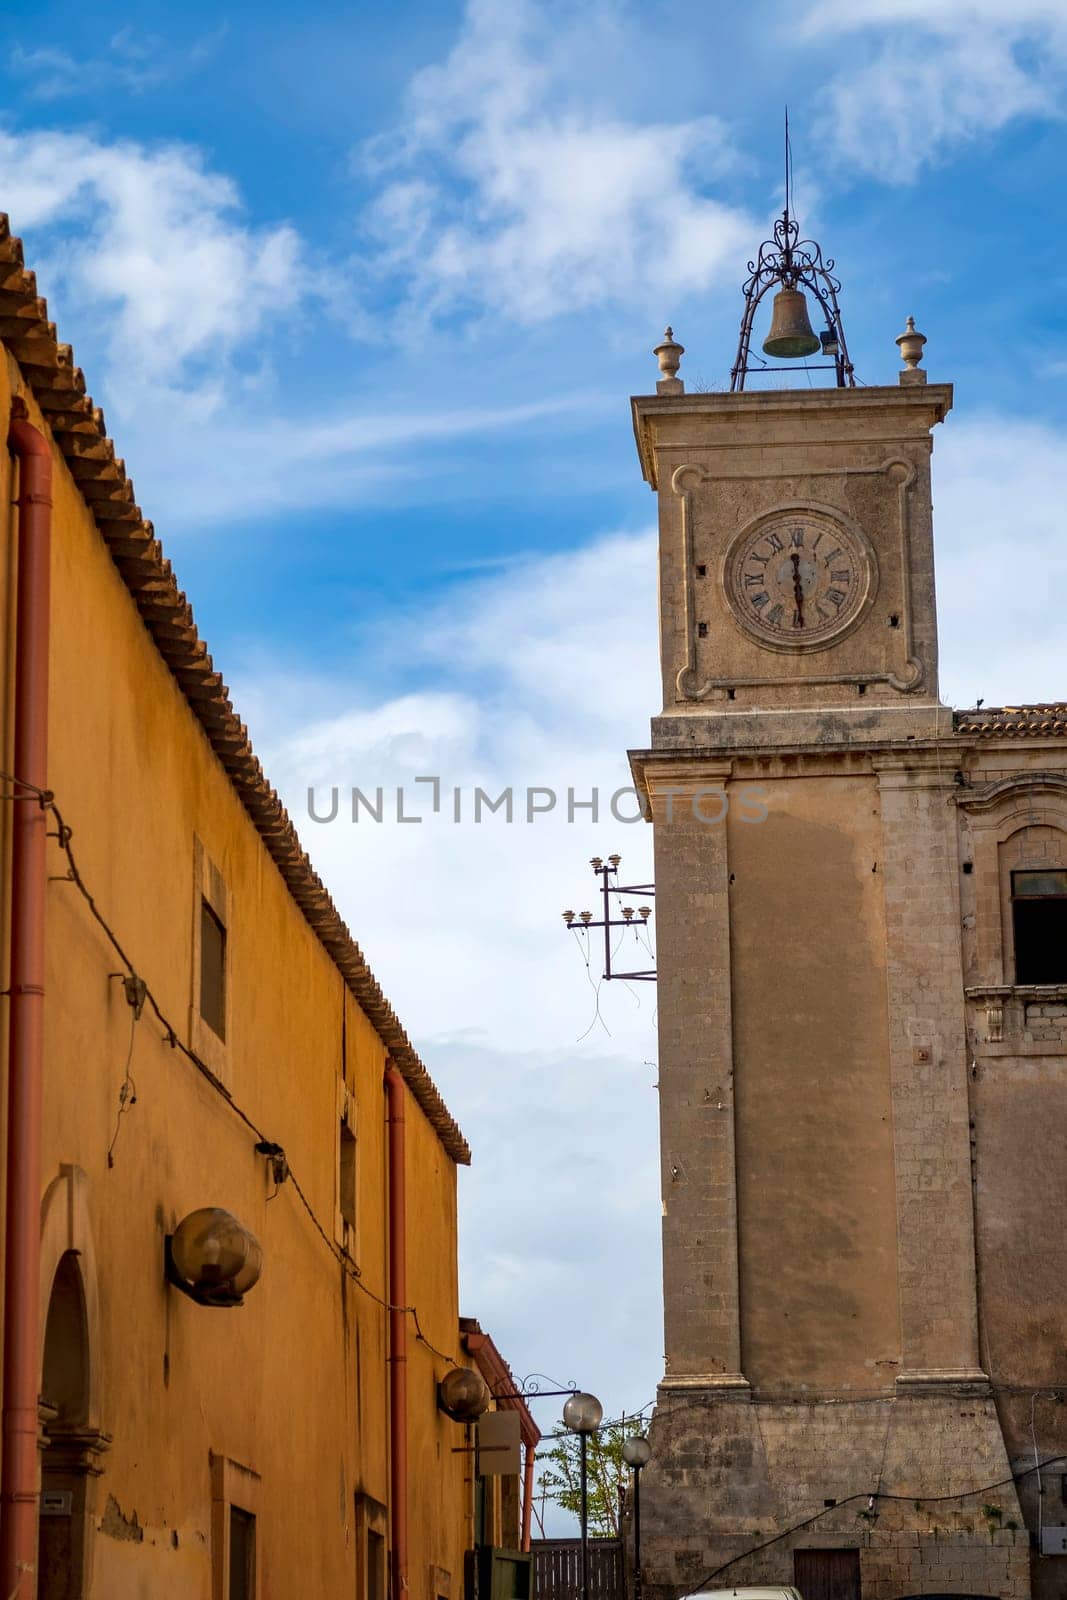 The ancient tower with clock and bell of the former Trigona, Noto, sicily